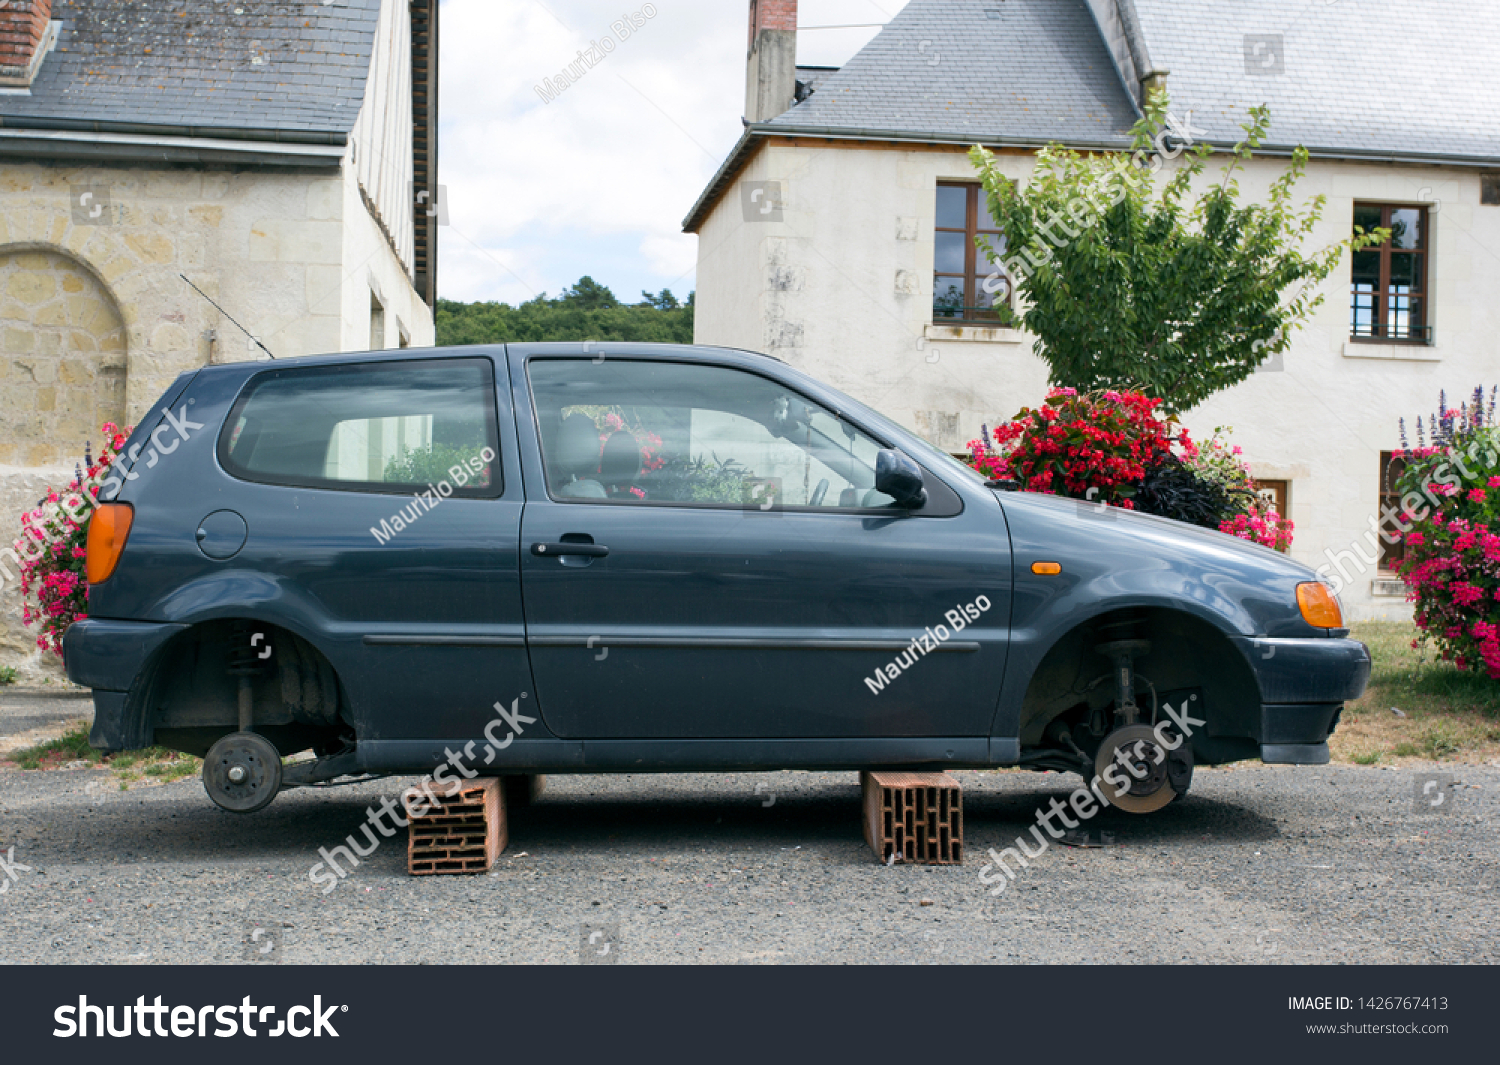 2,093 Car Without Tires Images, Stock Photos & Vectors Shutterstock